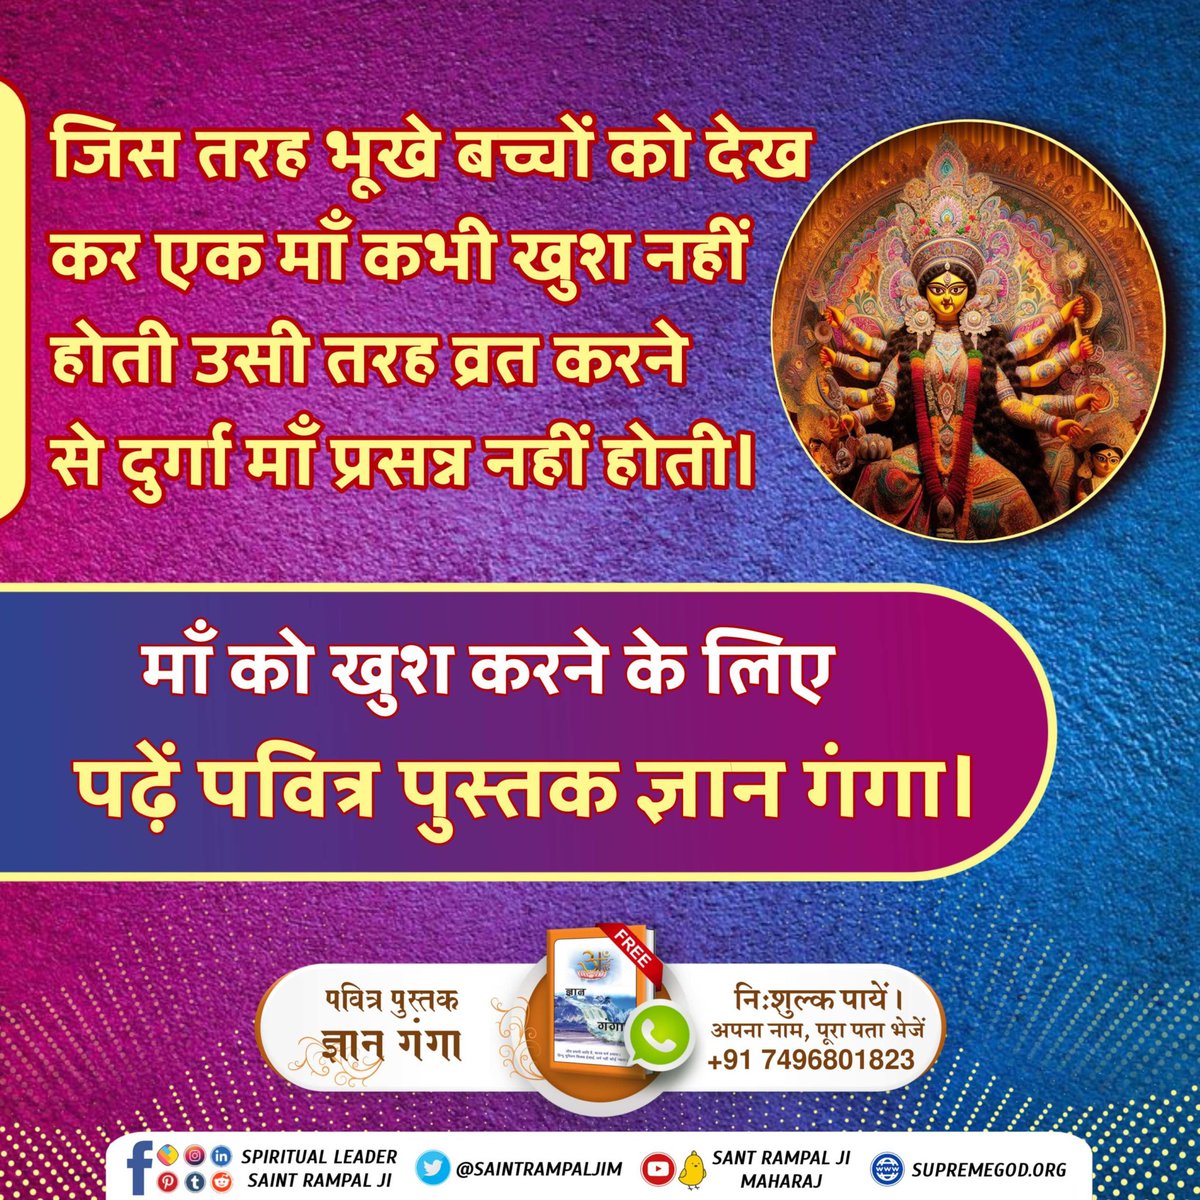 It has been clarified in Bhagavad Gita Chapter 6 Verse 16 that Yog sadhana is not accomplished by fasting (by those who do not consume food); which means, it has been completely prohibited to keep fasts. #भूखेबच्चेदेख_मां_कैसे_खुश_हो